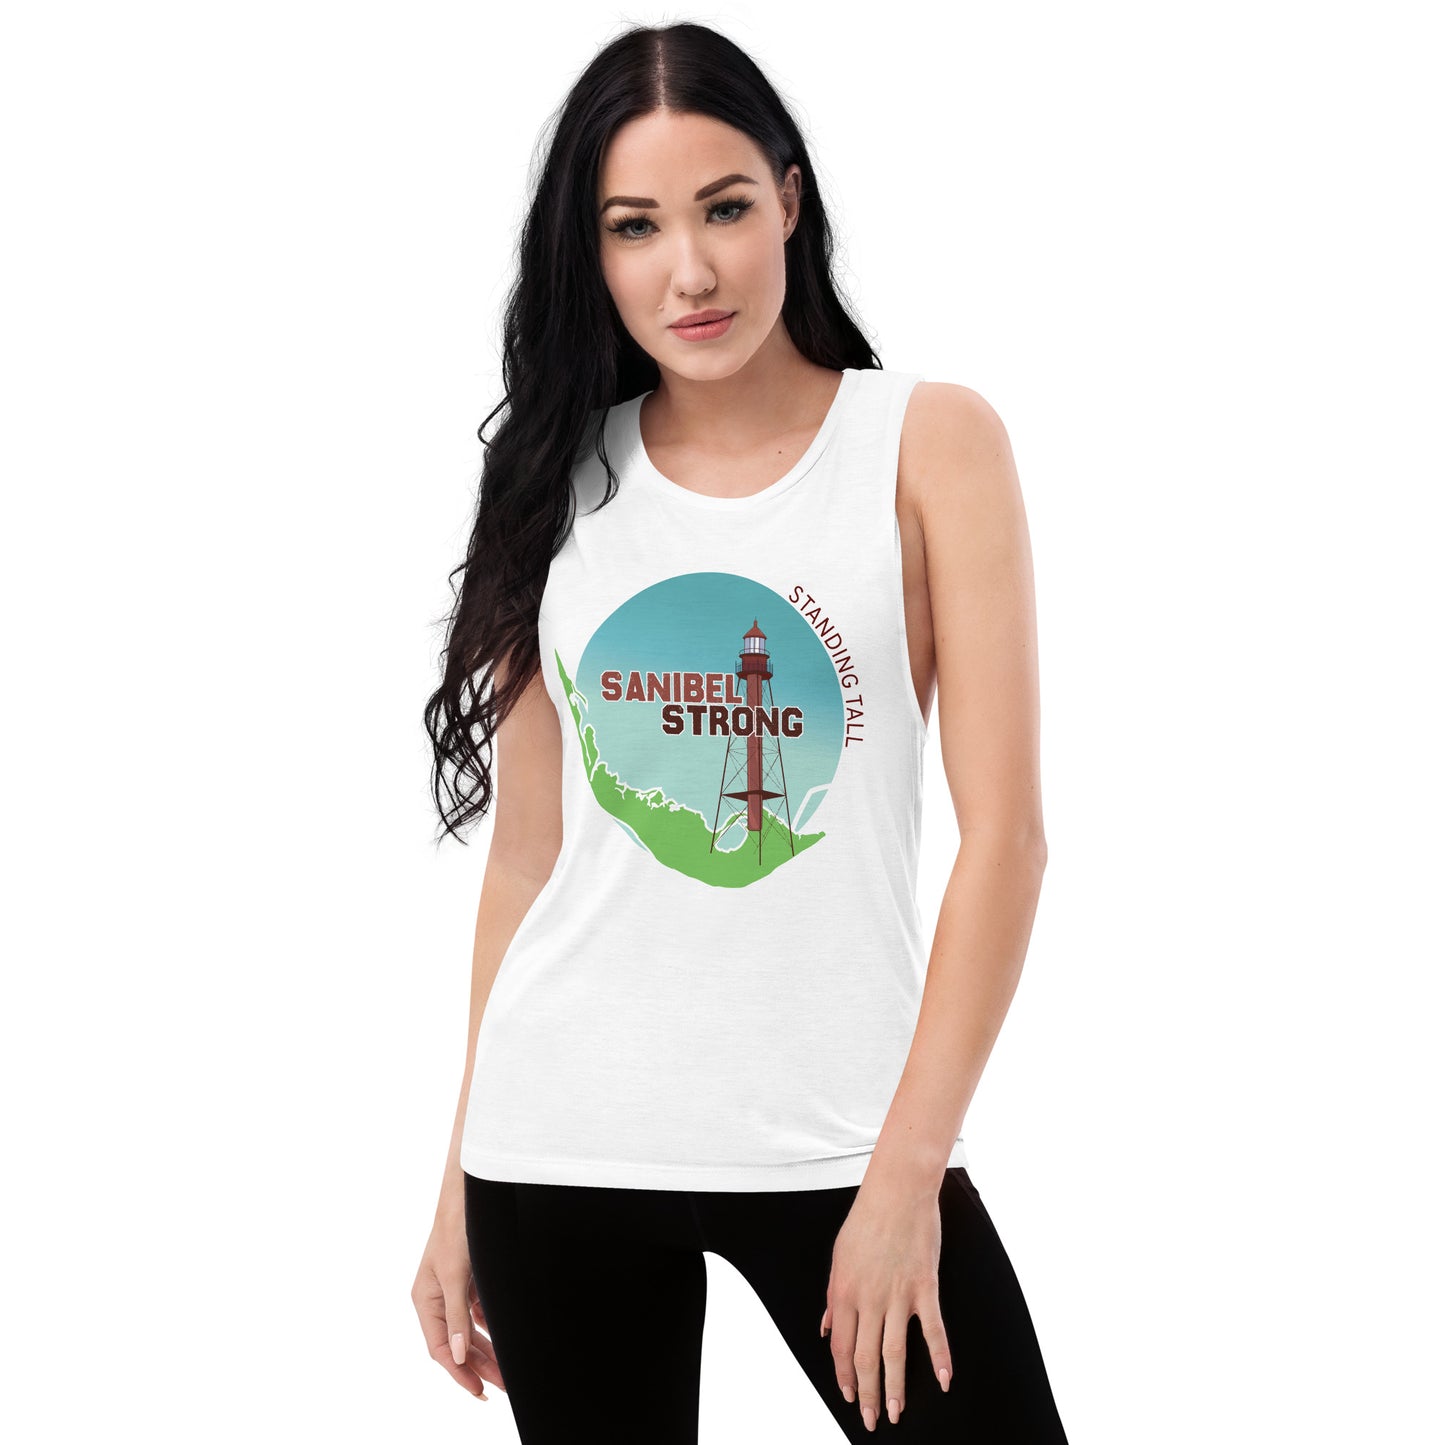 Sanibel Strong Standing Tall Ladies' Muscle Tank